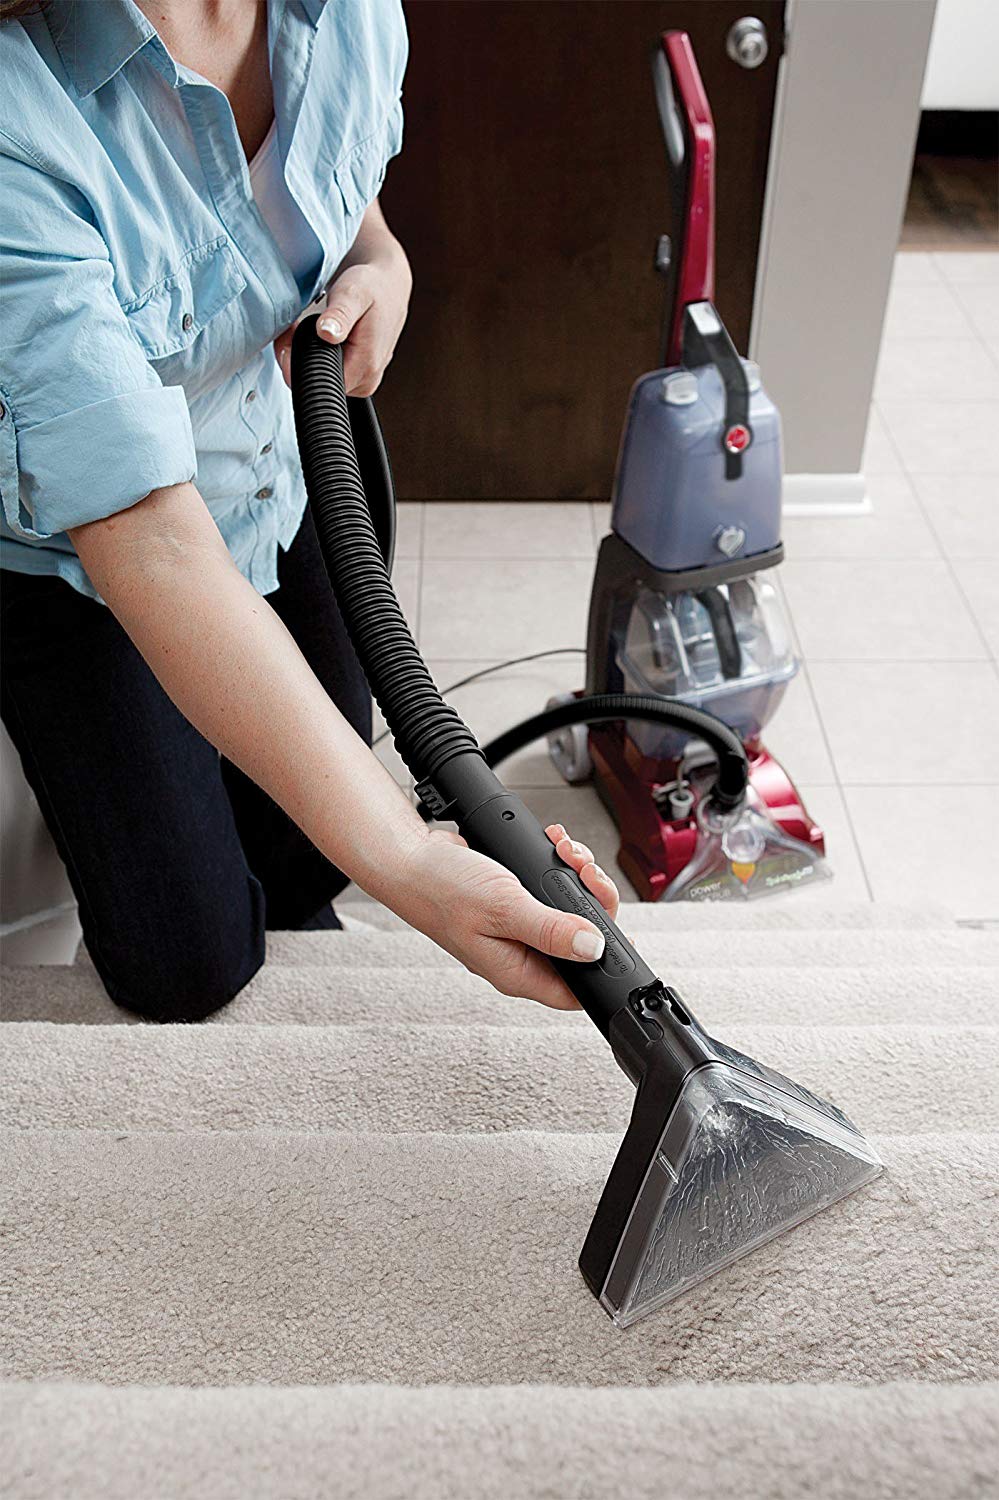 Hoover-Power-Scrub-Deluxe-Carpet-Washer-FH50150-Stairs